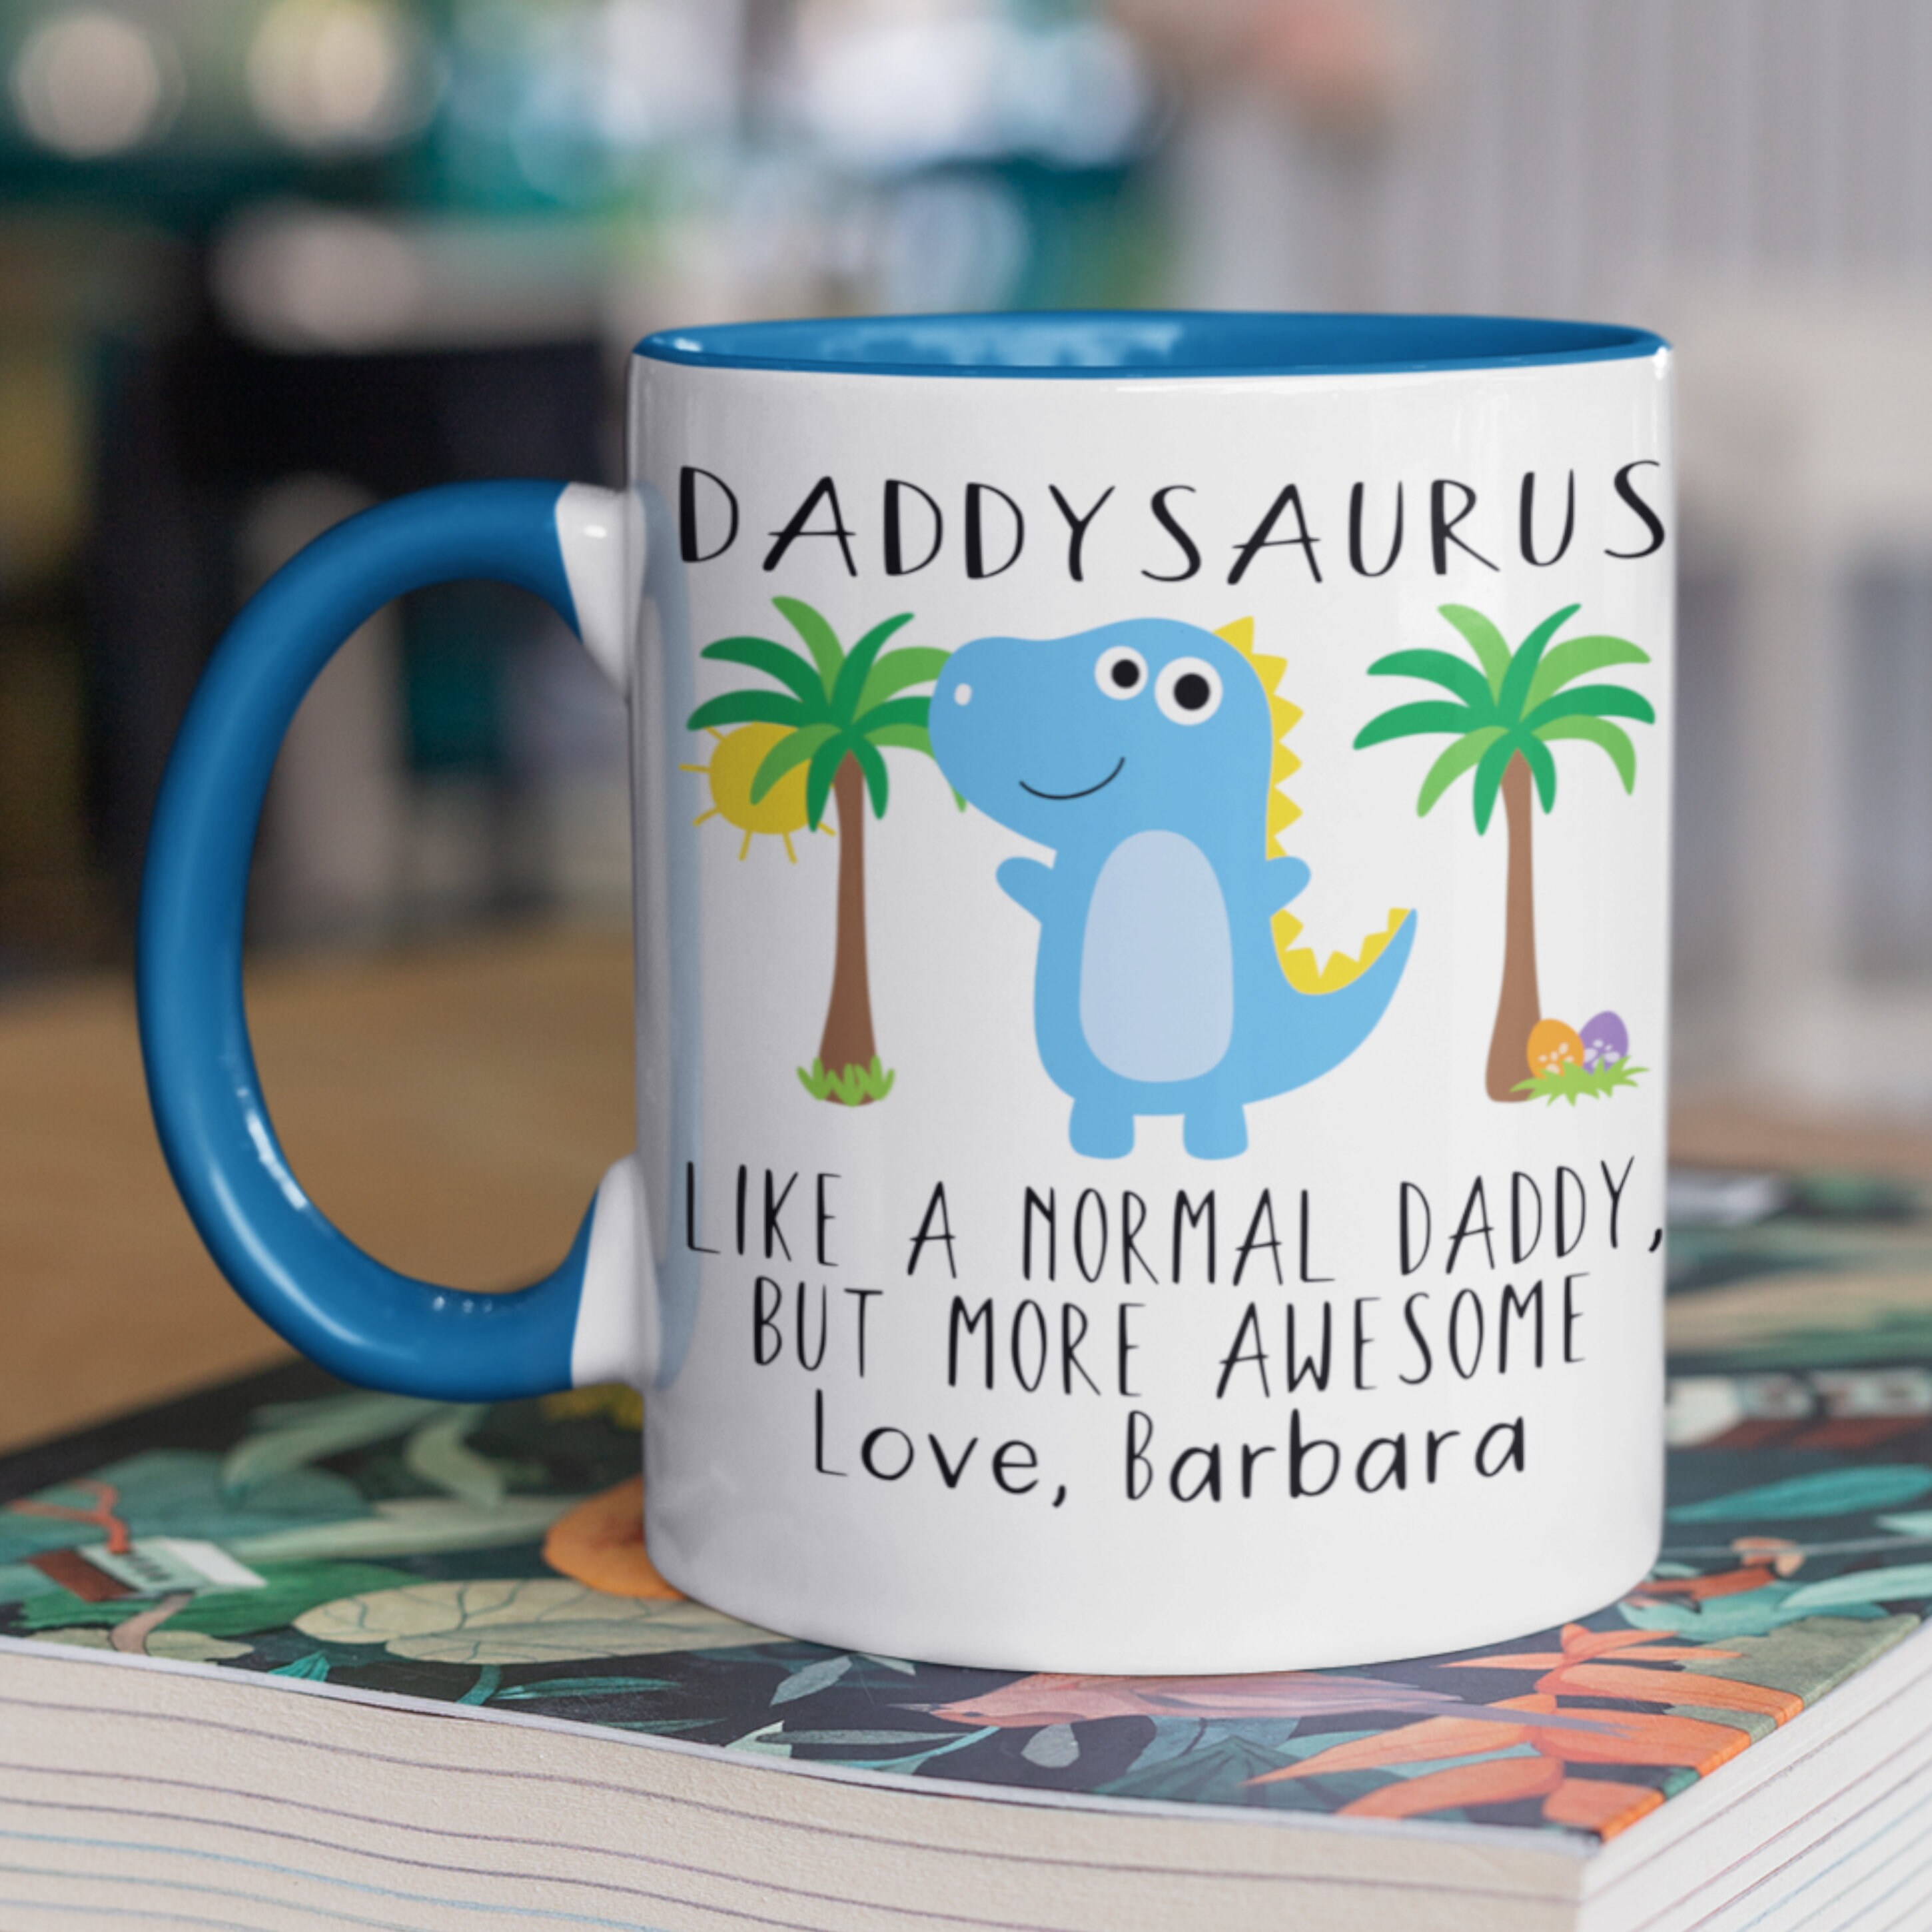 Dadasaurus Coffee Mug, Personalized Dad Cup with Kids Names, New Baby Gift  for Husband Papa, Dinosau…See more Dadasaurus Coffee Mug, Personalized Dad